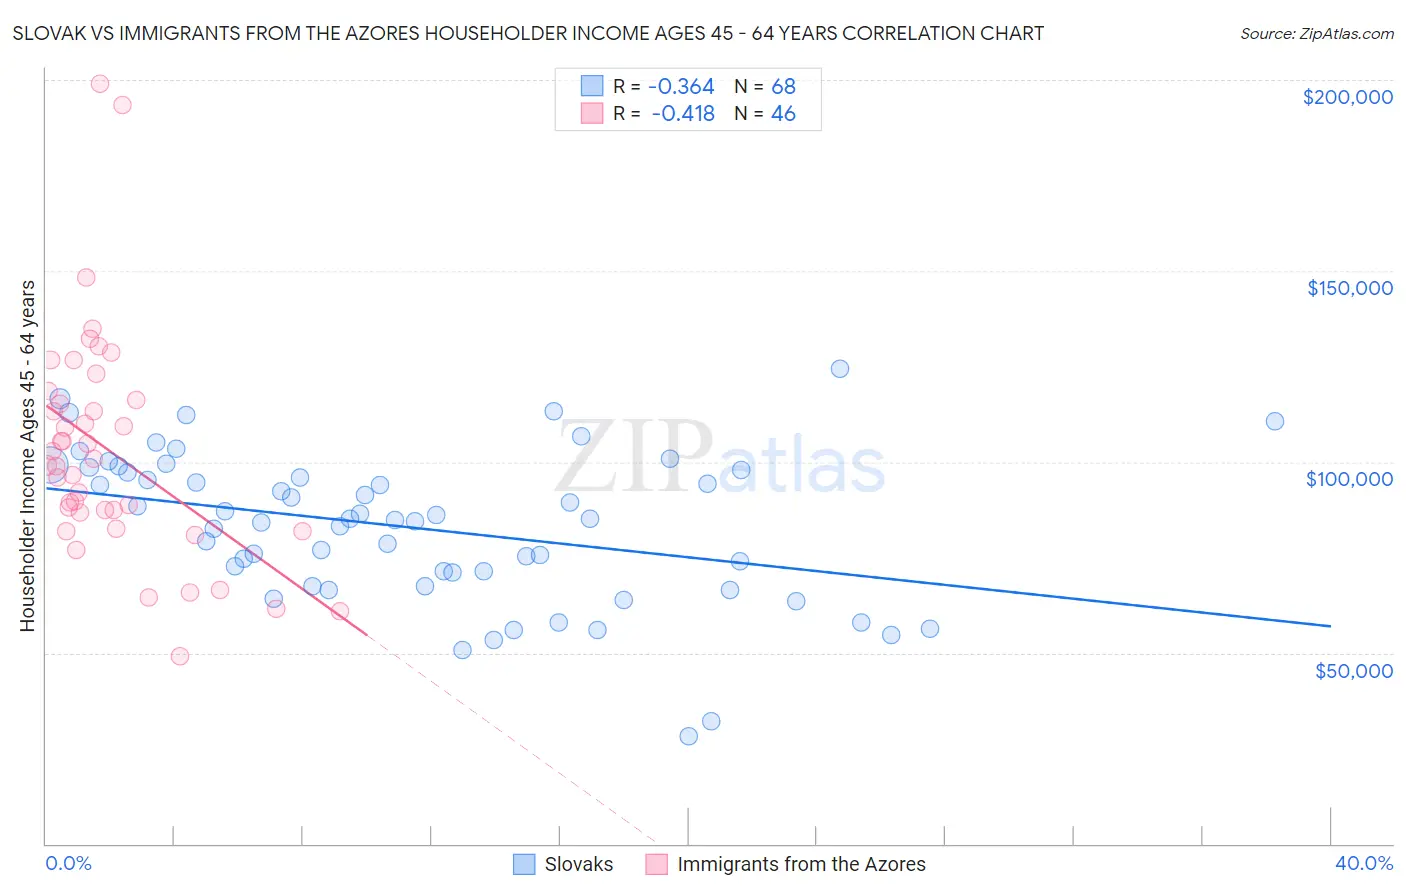 Slovak vs Immigrants from the Azores Householder Income Ages 45 - 64 years